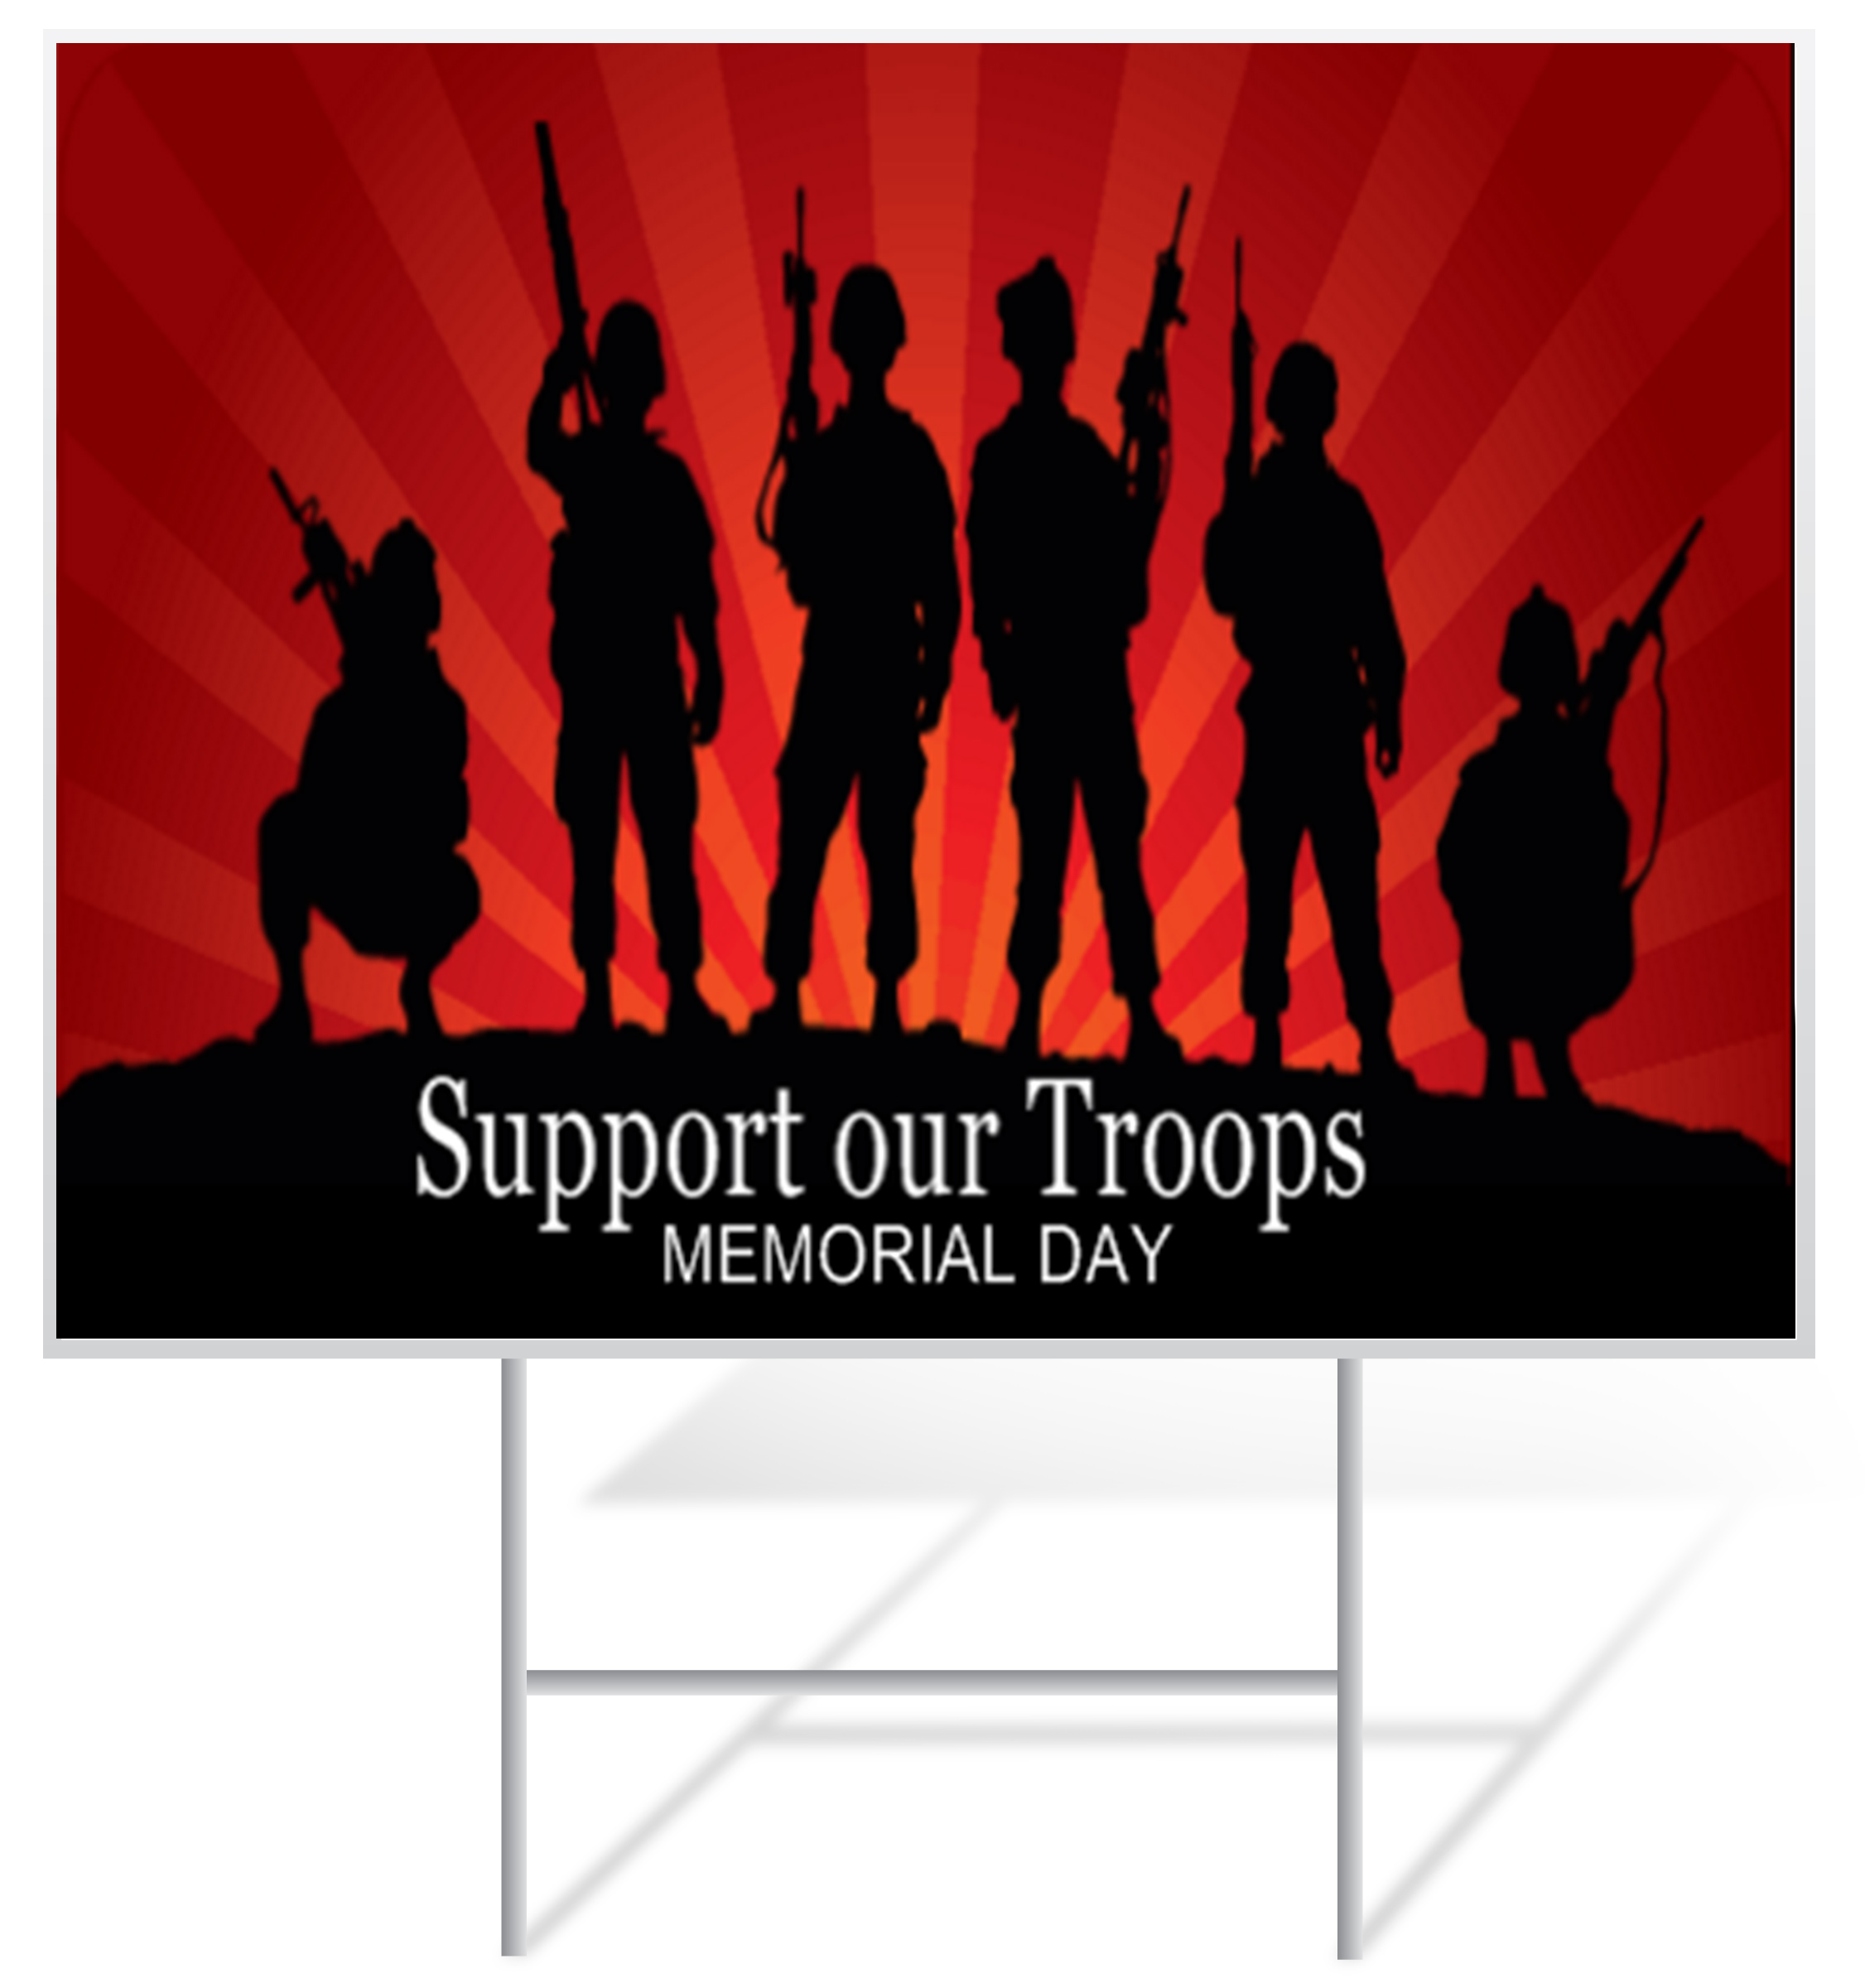 Military Lawn Sign Example | LawnSigns.com